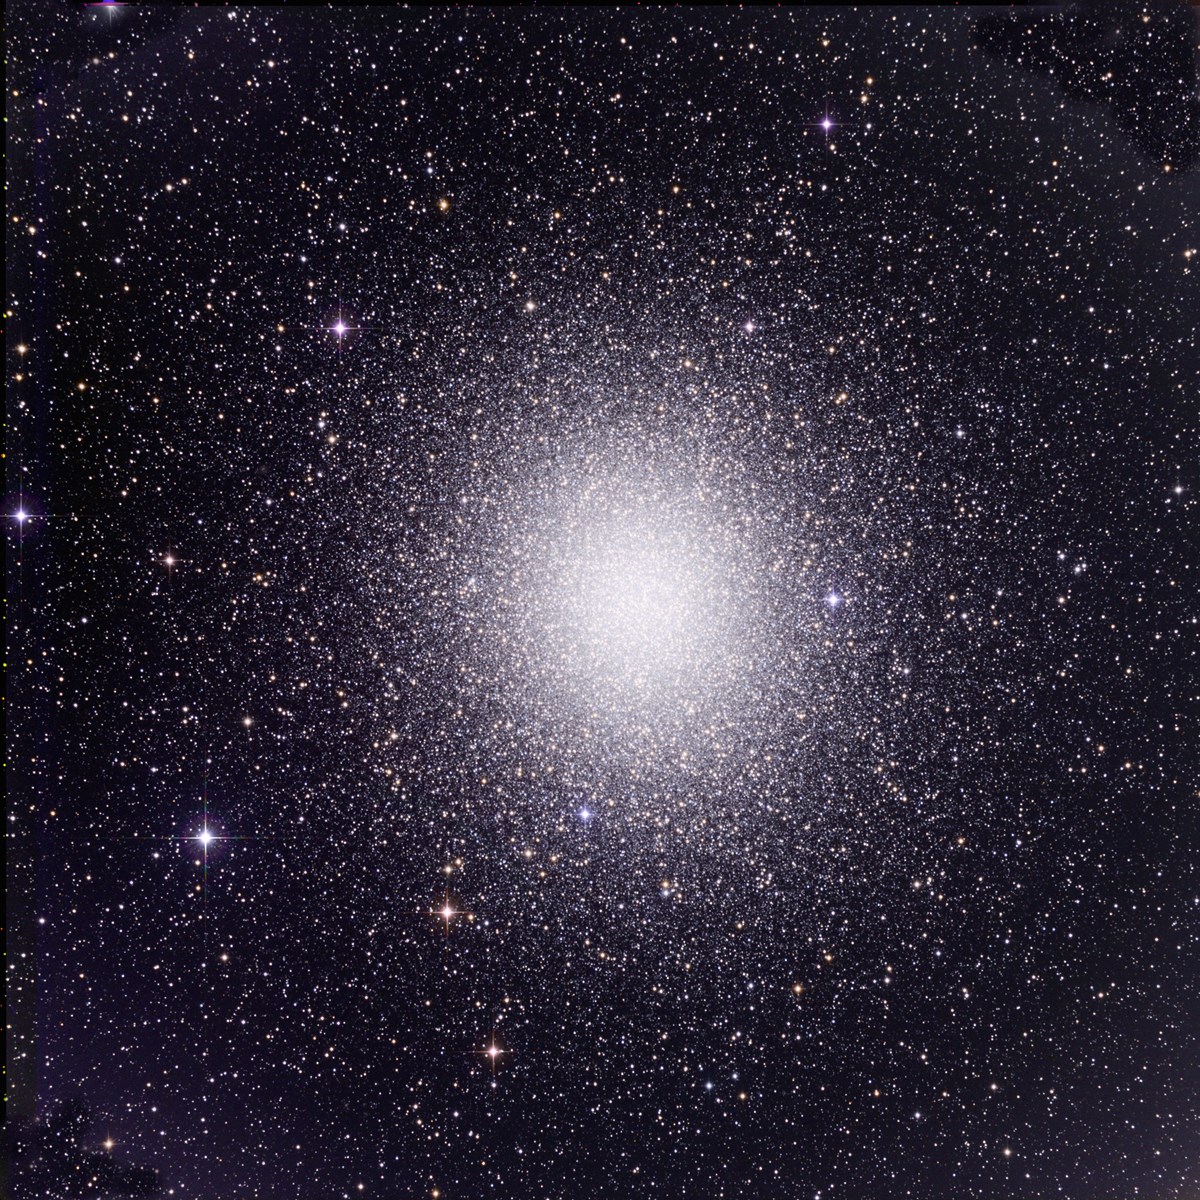 With several million stars, Omega Centauri is the most magnificent example of a globular star cluster in our galaxy. At its core, the average separation between stars is a mere 0.1 light years. By contrast, the closest known star to our Sun, Proxima Centauri, is 4.2 light years away.